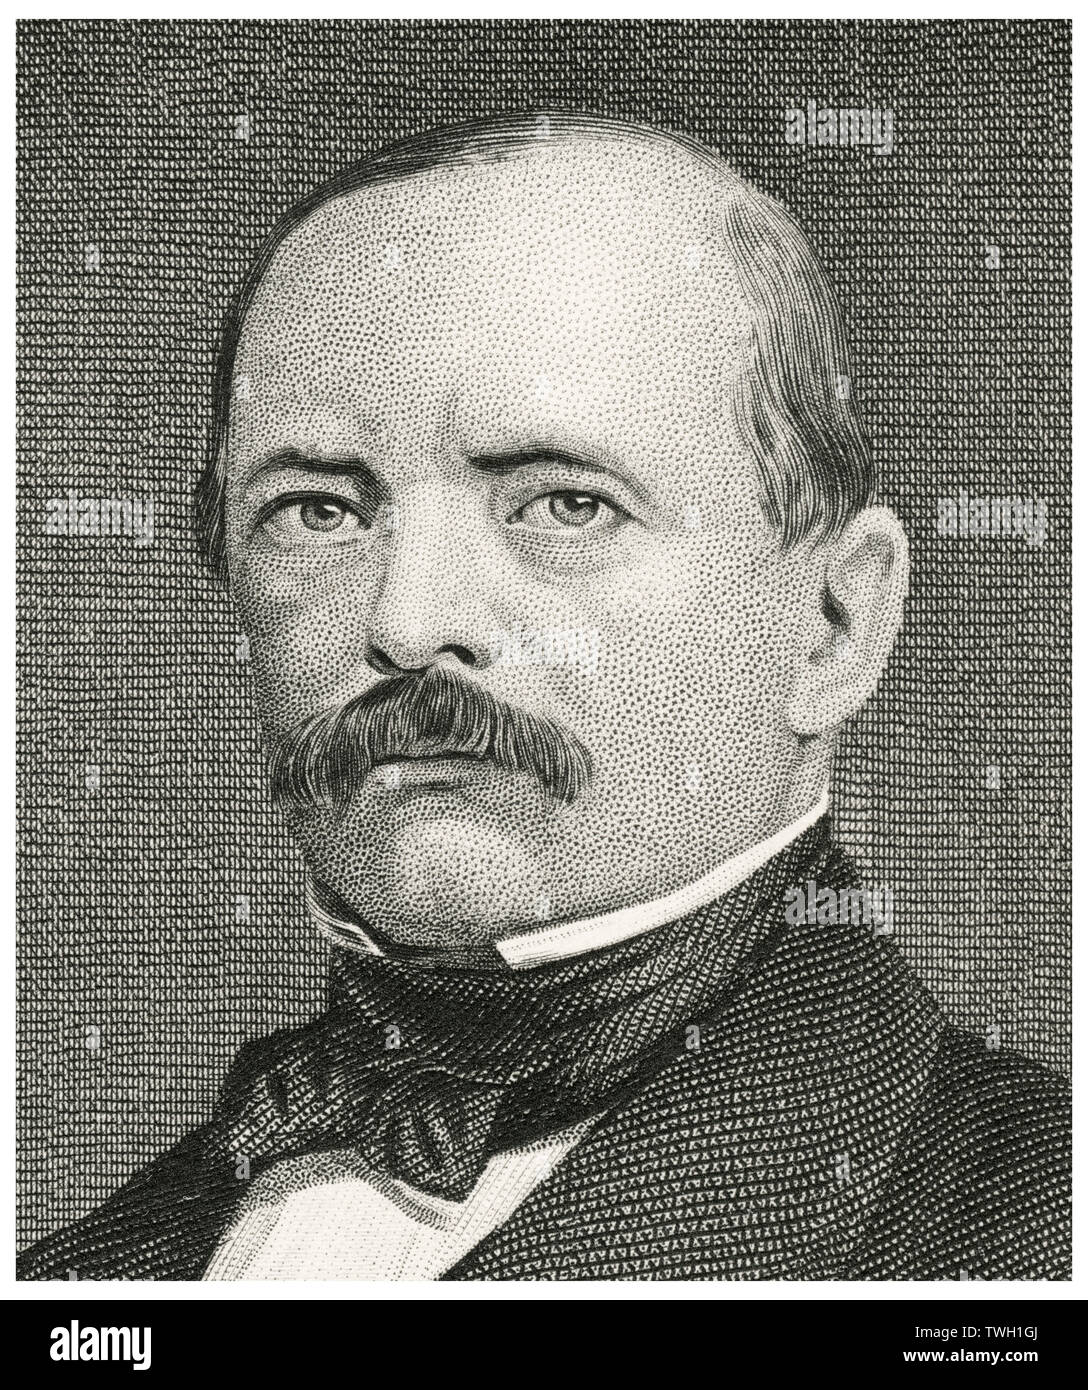 Otto von Bismarck (1815-98), Prussian Statesman and First Chancellor of the German Empire 1871-90, Head and Shoulders Portrait, Steel Engraving, Portrait Gallery of Eminent Men and Women of Europe and America by Evert A. Duyckinck, Published by Henry J. Johnson, Johnson, Wilson & Company, New York, 1873 Stock Photo